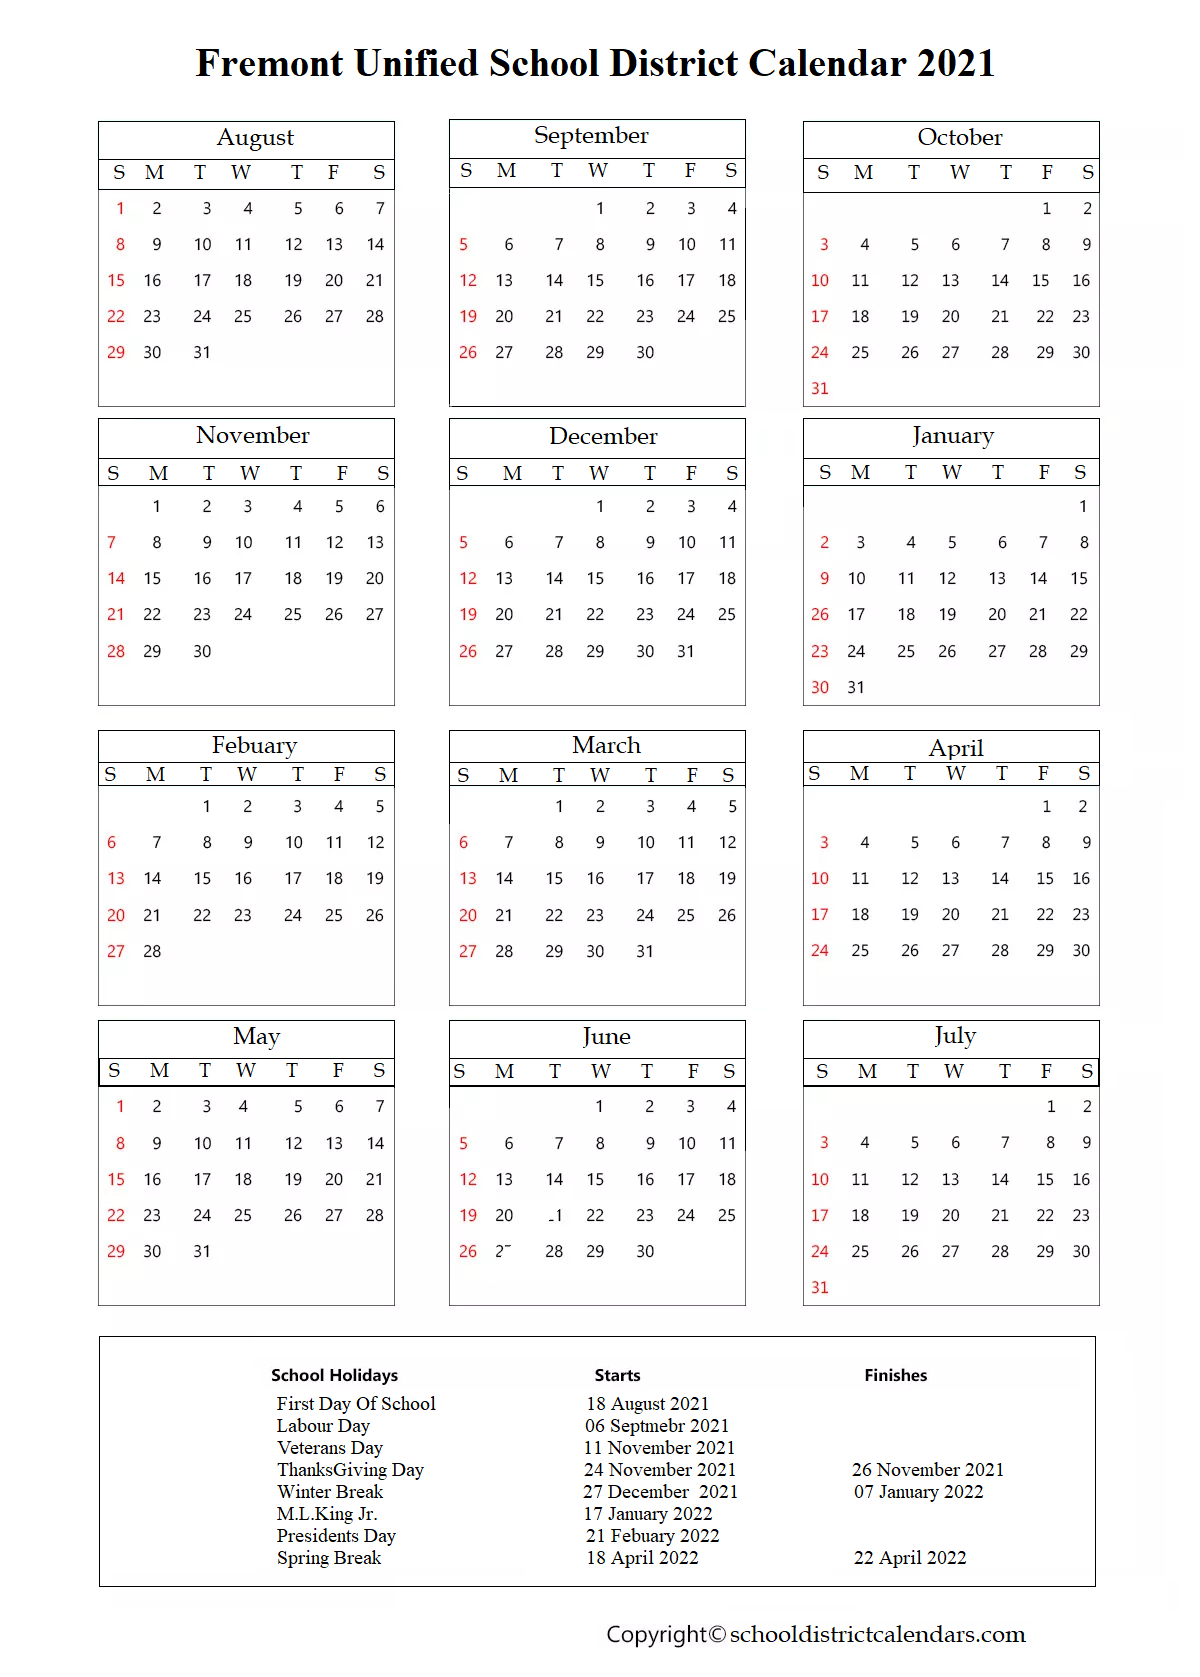 Fremont Unified County School District Proposed Calendar